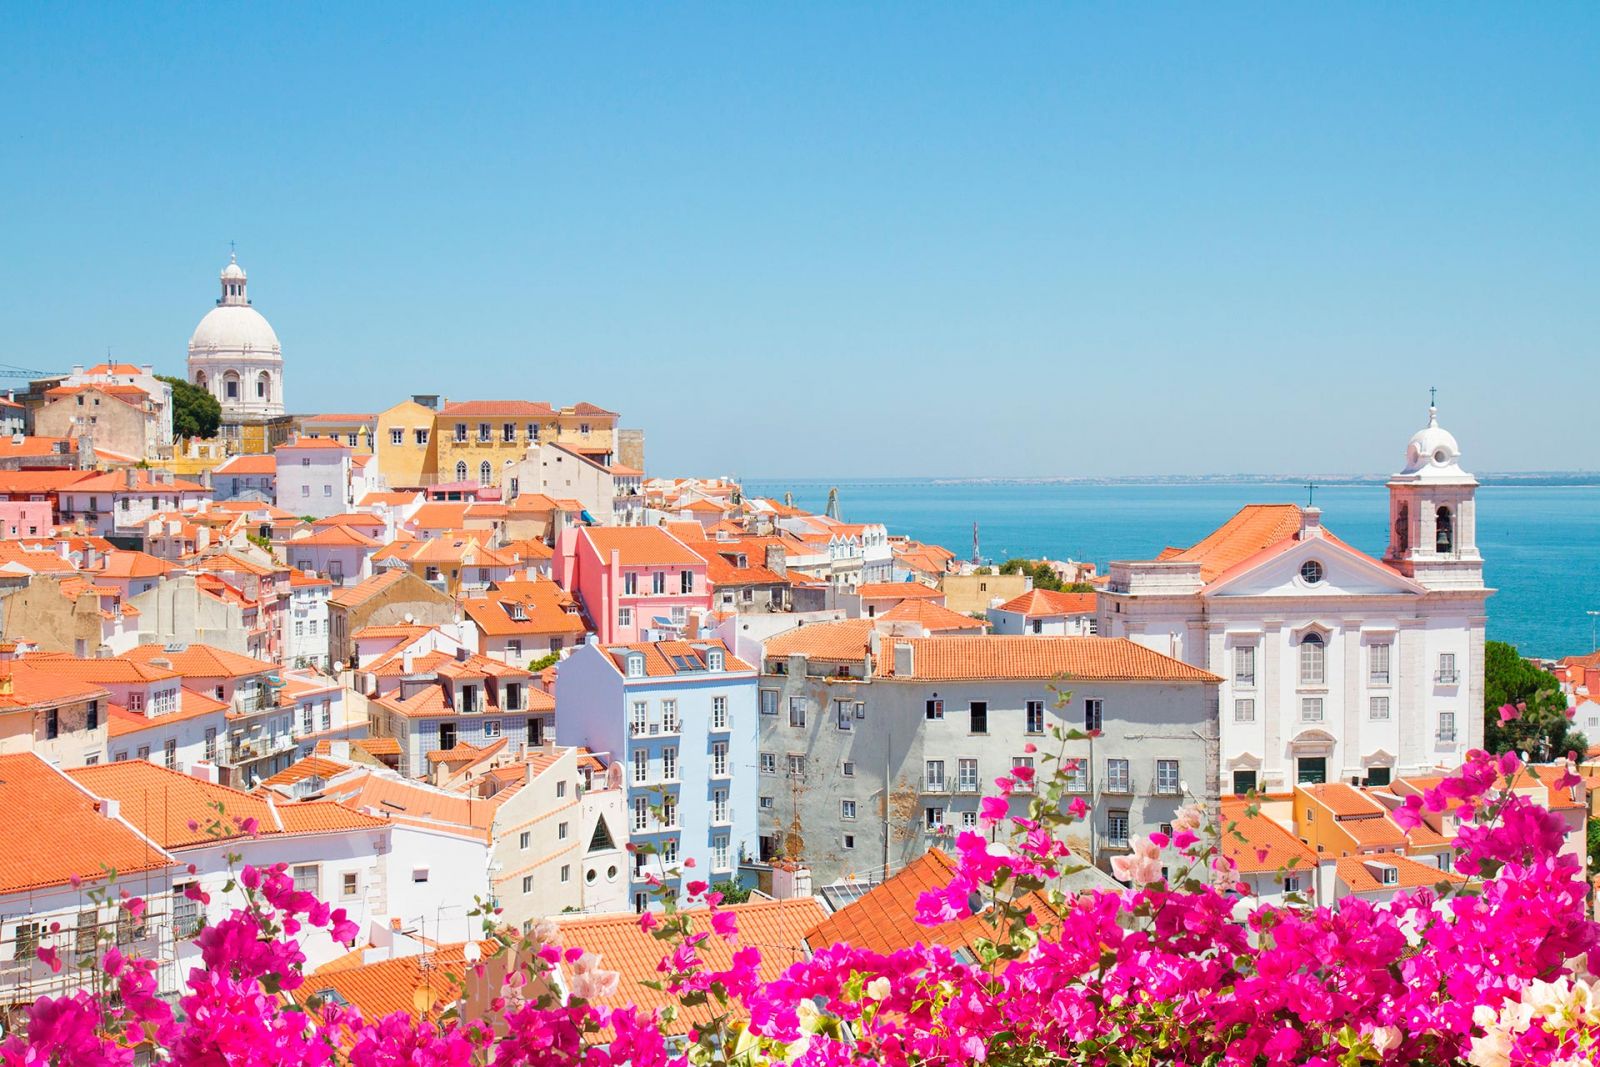 Portuguese cities look marvelous during the blossoming season.